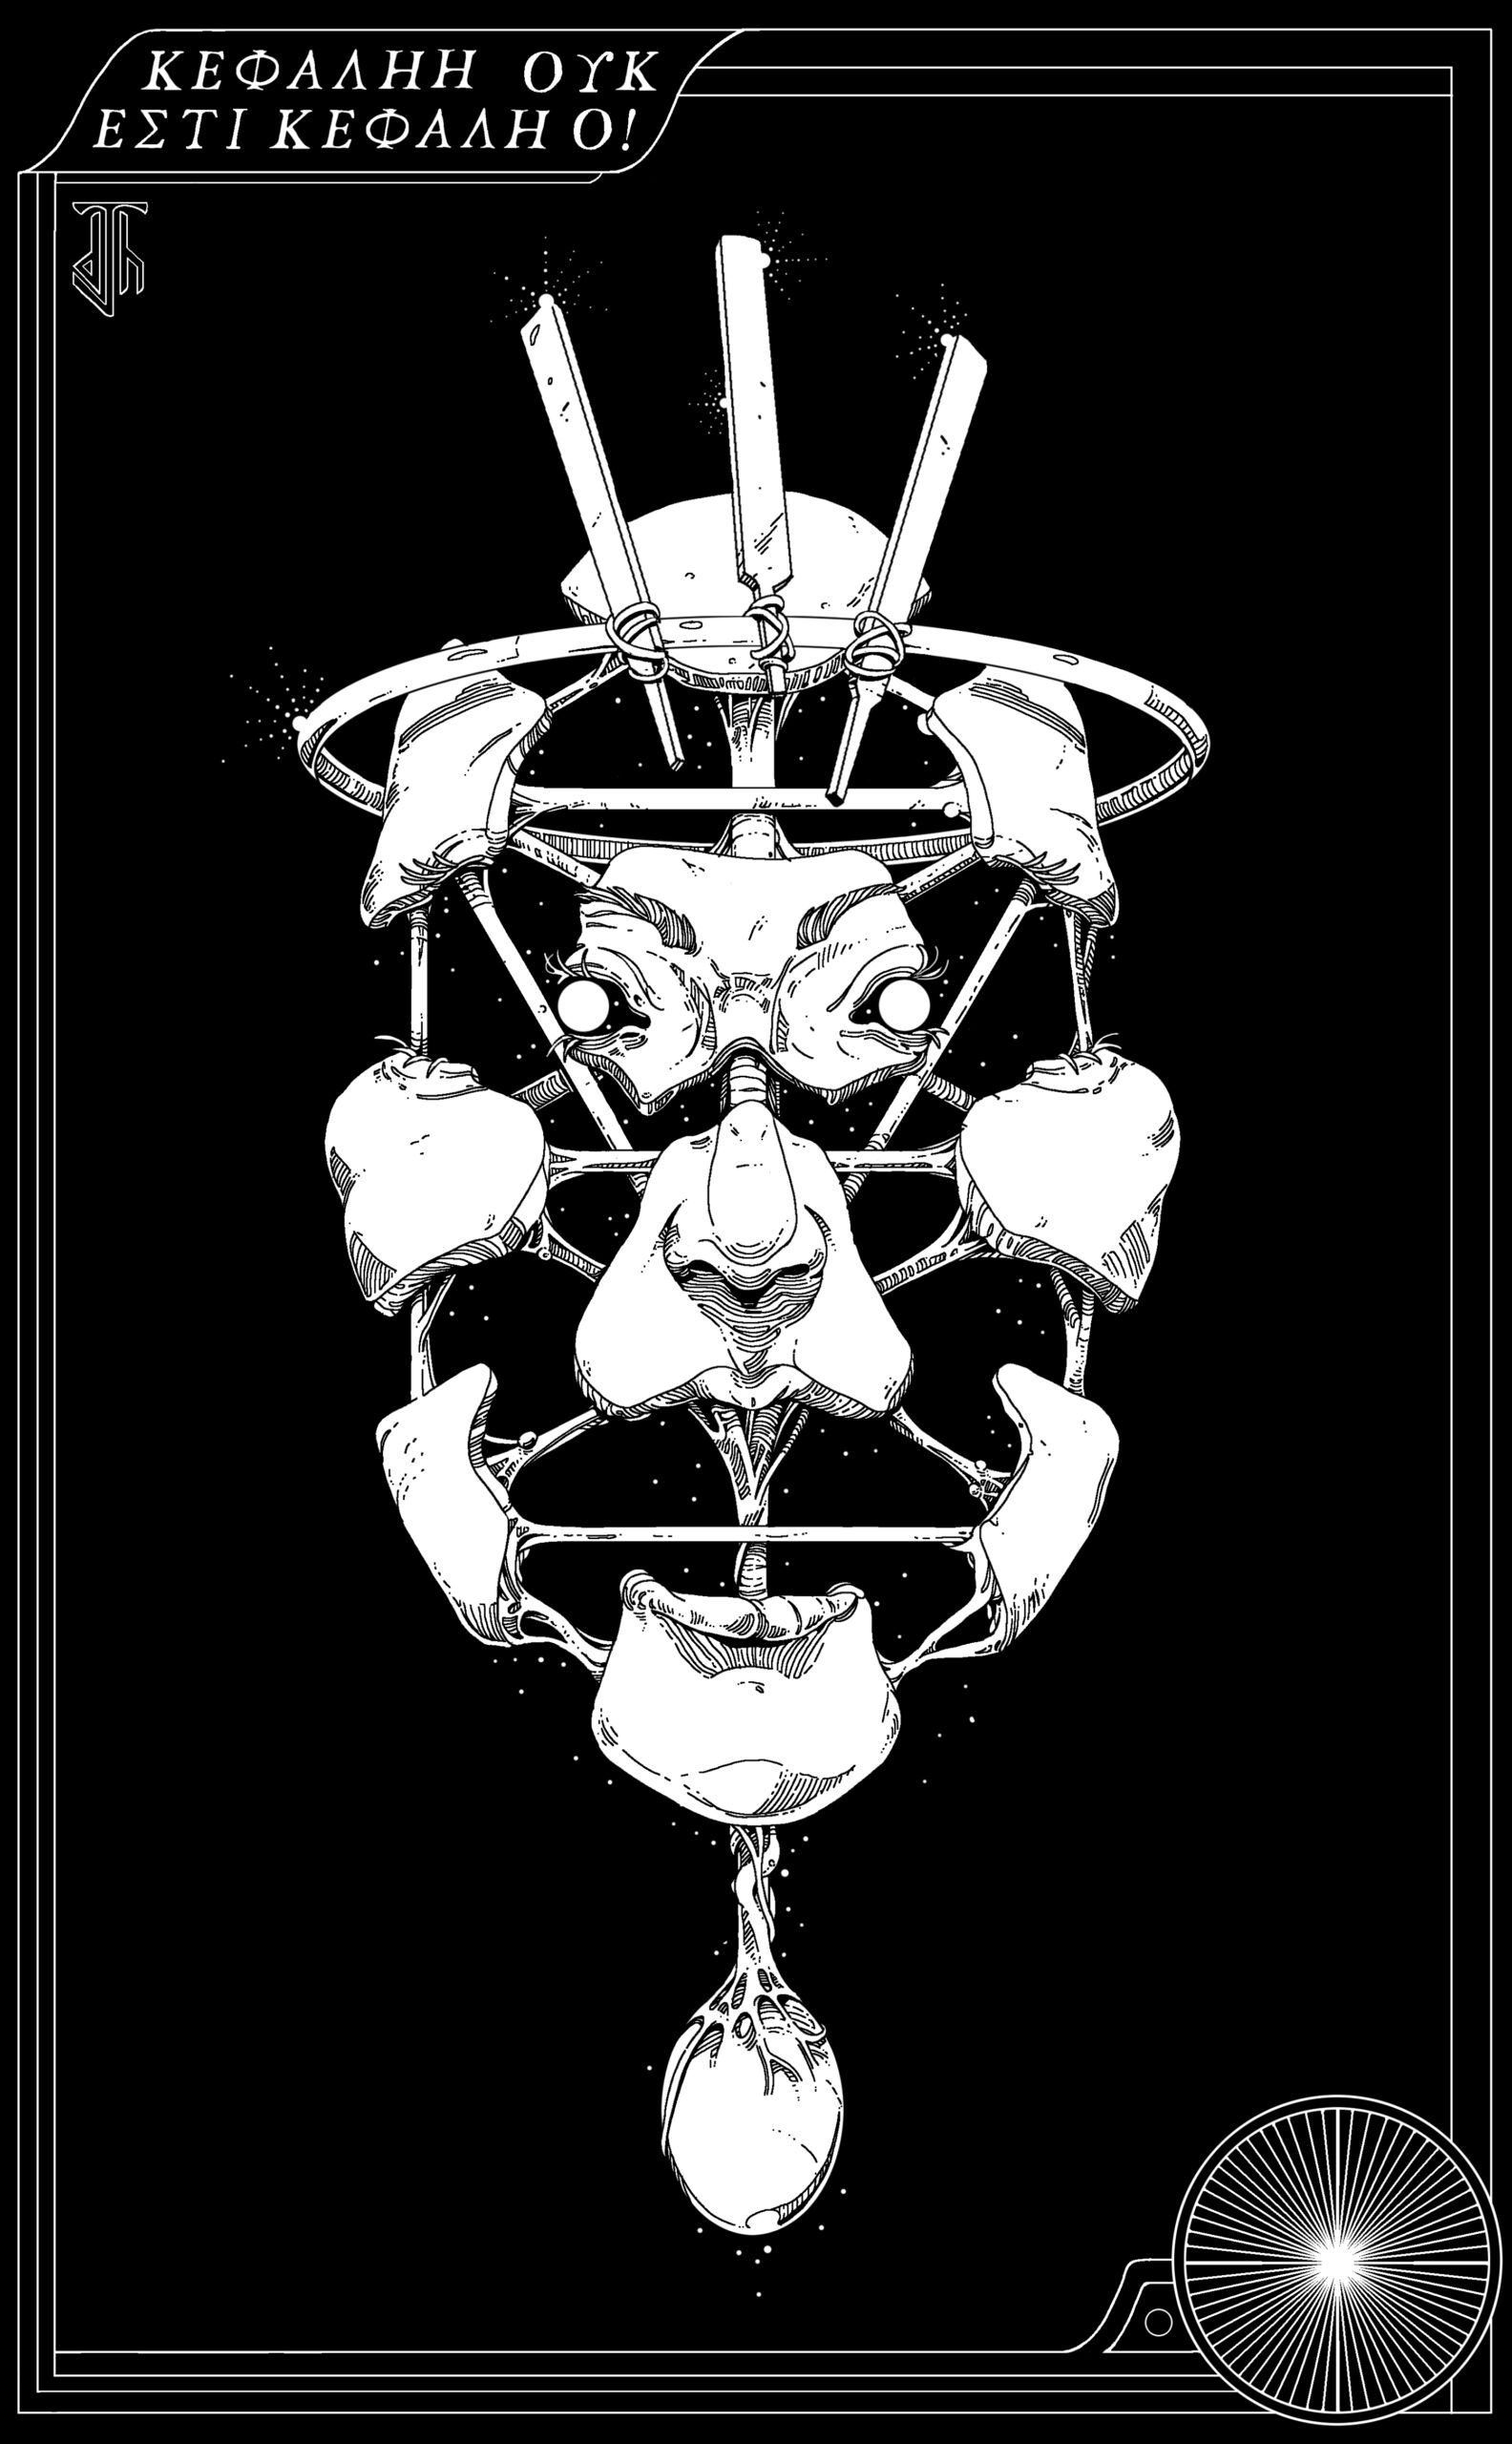 A single face split into several pieces, the uniform segments of flesh connecting them forming a kind of pentacle, though one with a surprising lack of gore.